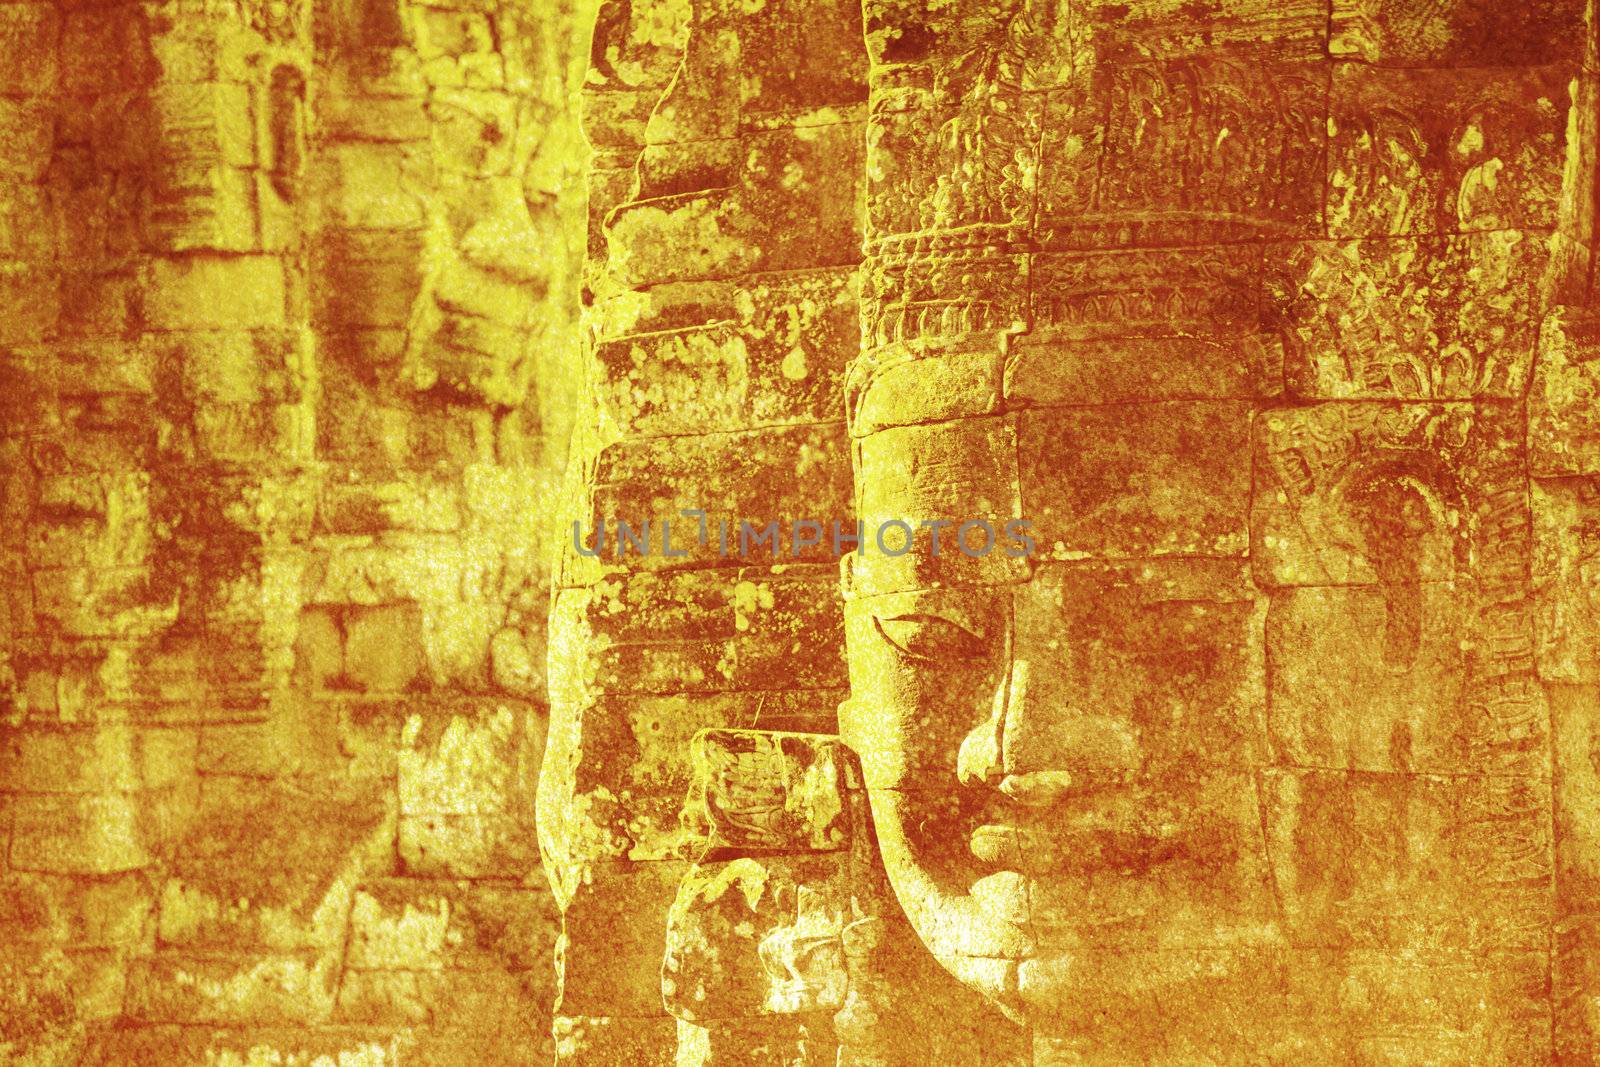 Faces carved into stones in Bayon temple in Angkor Cambodia